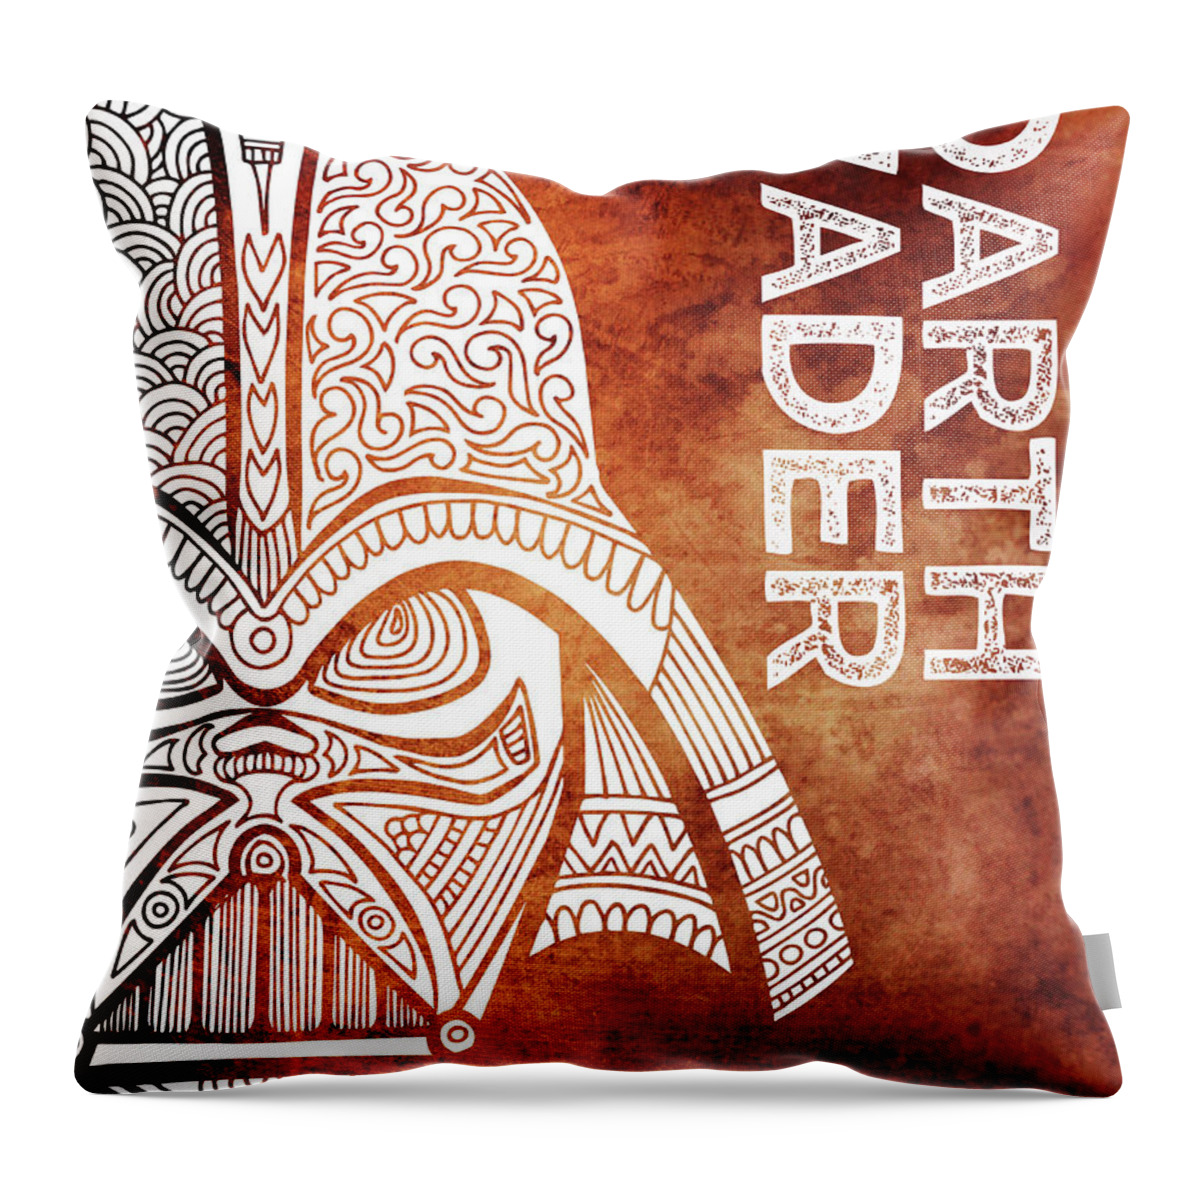 Darth Vader Throw Pillow featuring the mixed media Darth Vader - Star Wars Art - Brown and White by Studio Grafiikka